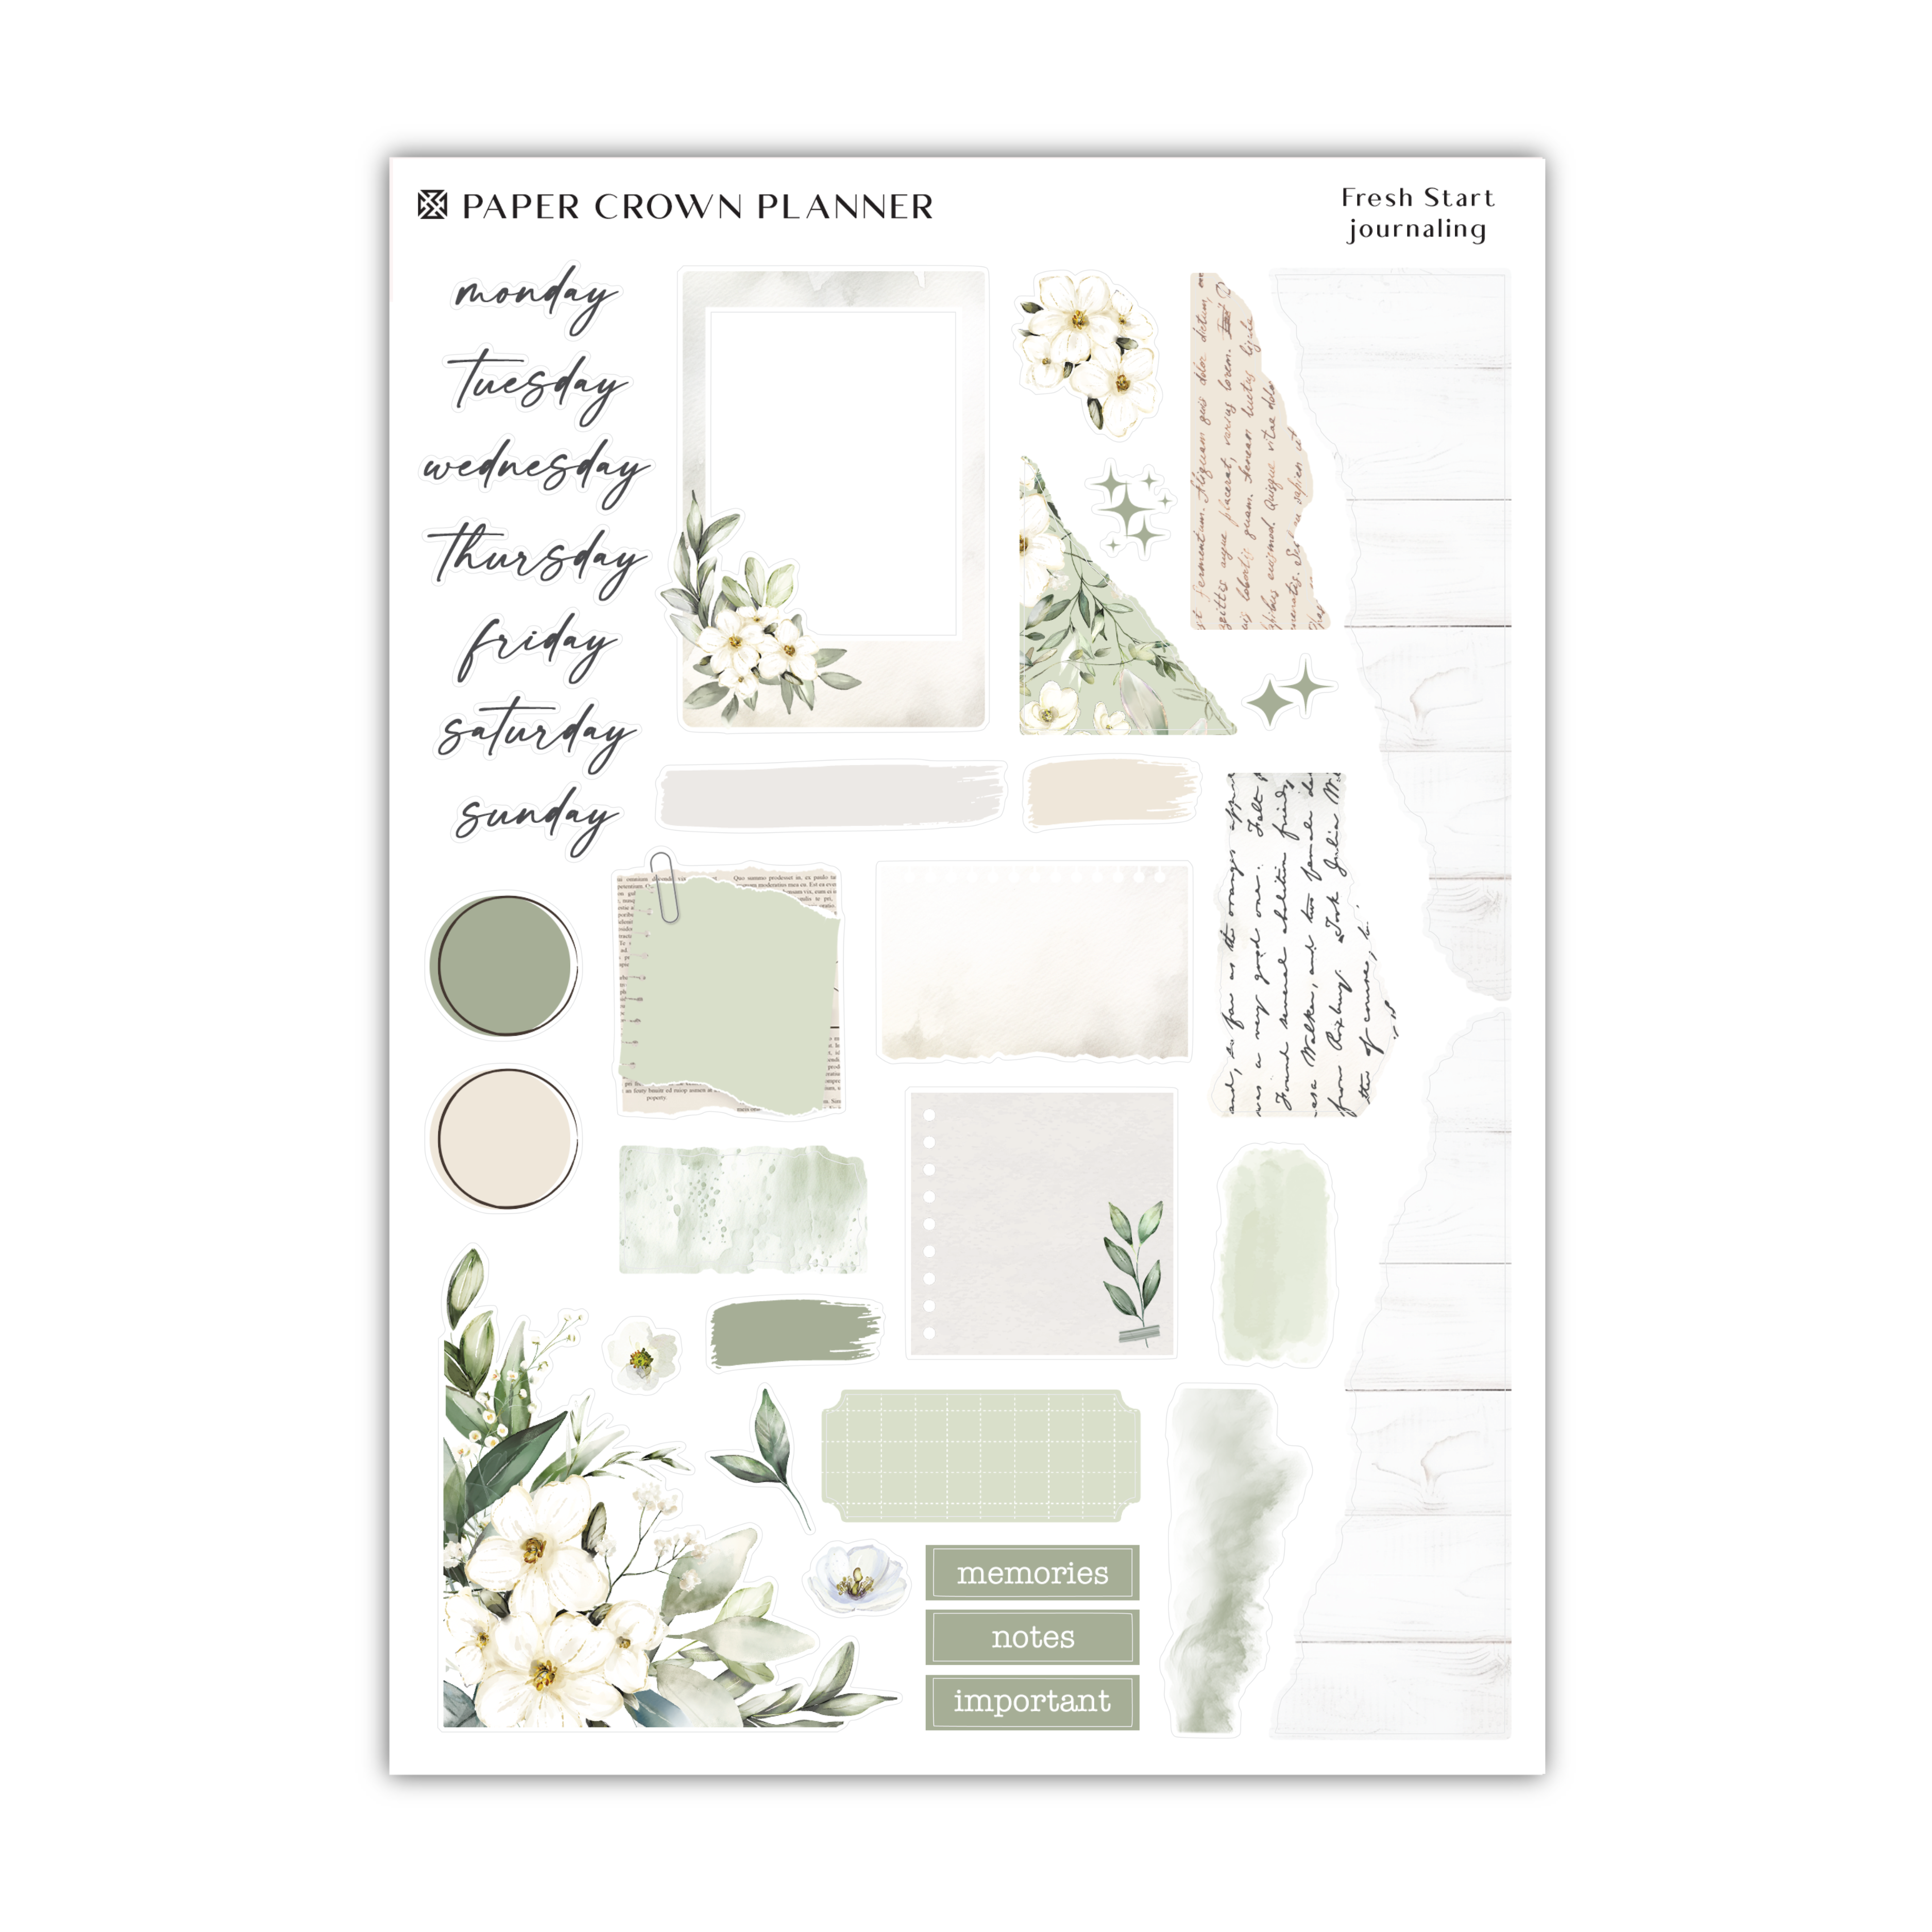 the paper crown planner sticker is shown with flowers and greenery